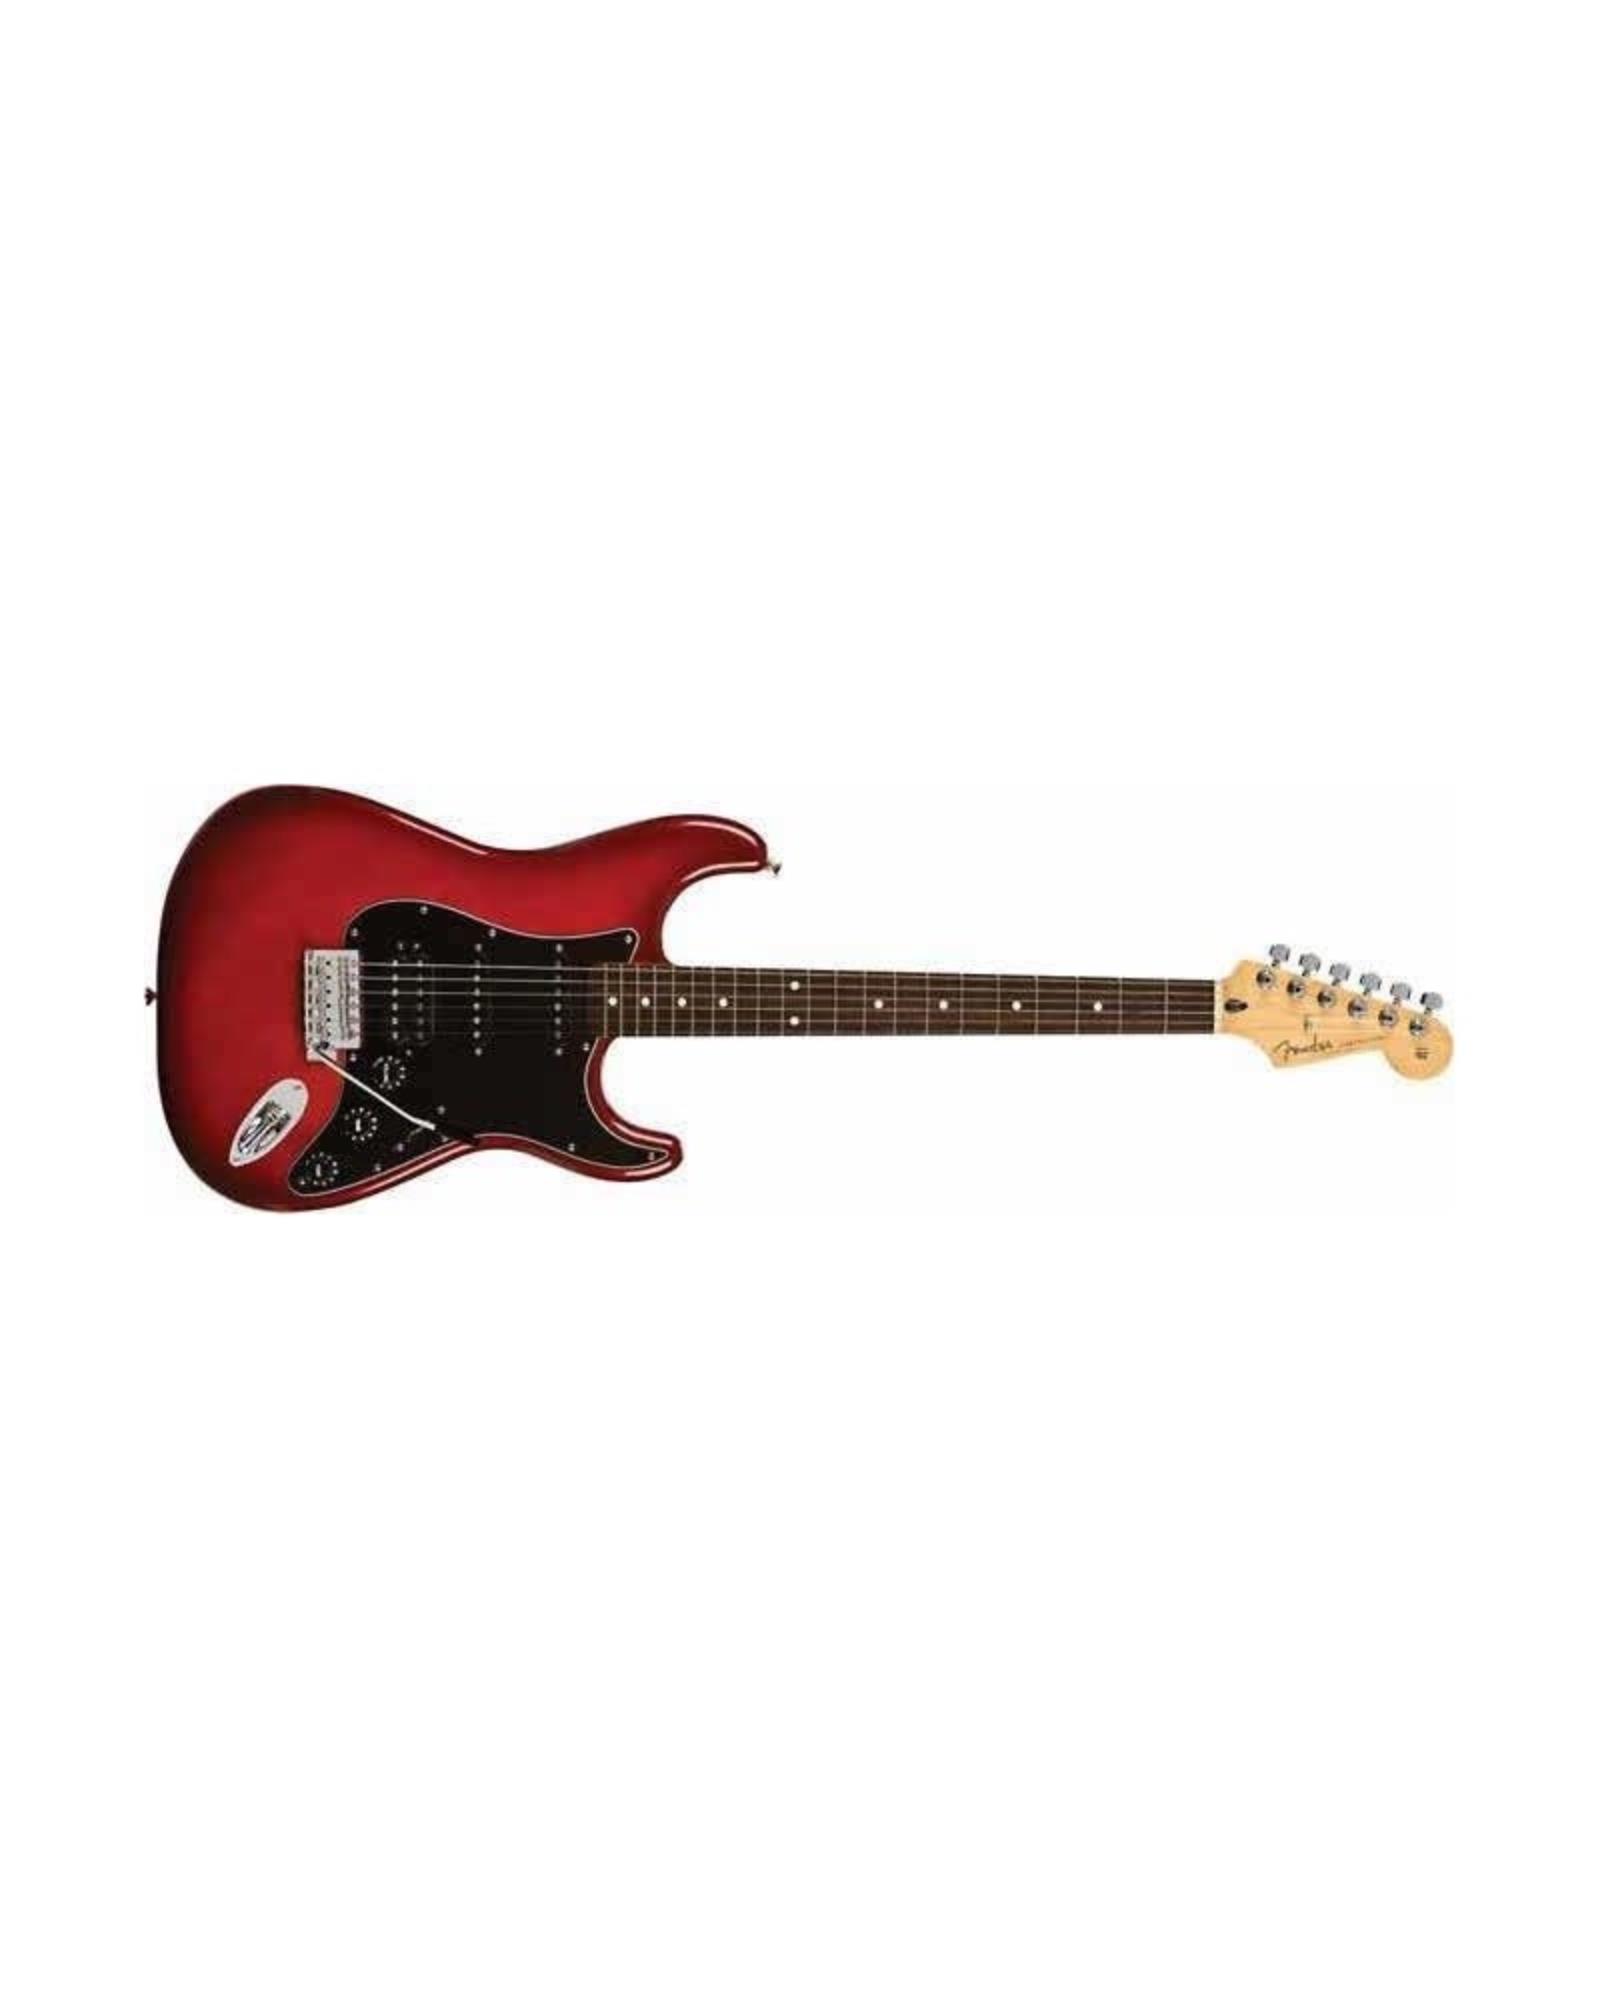 FENDER-Player-Stratocaster-HSS-Limited-Edition-Candy-Red-Burst-0140225571-sku-25066